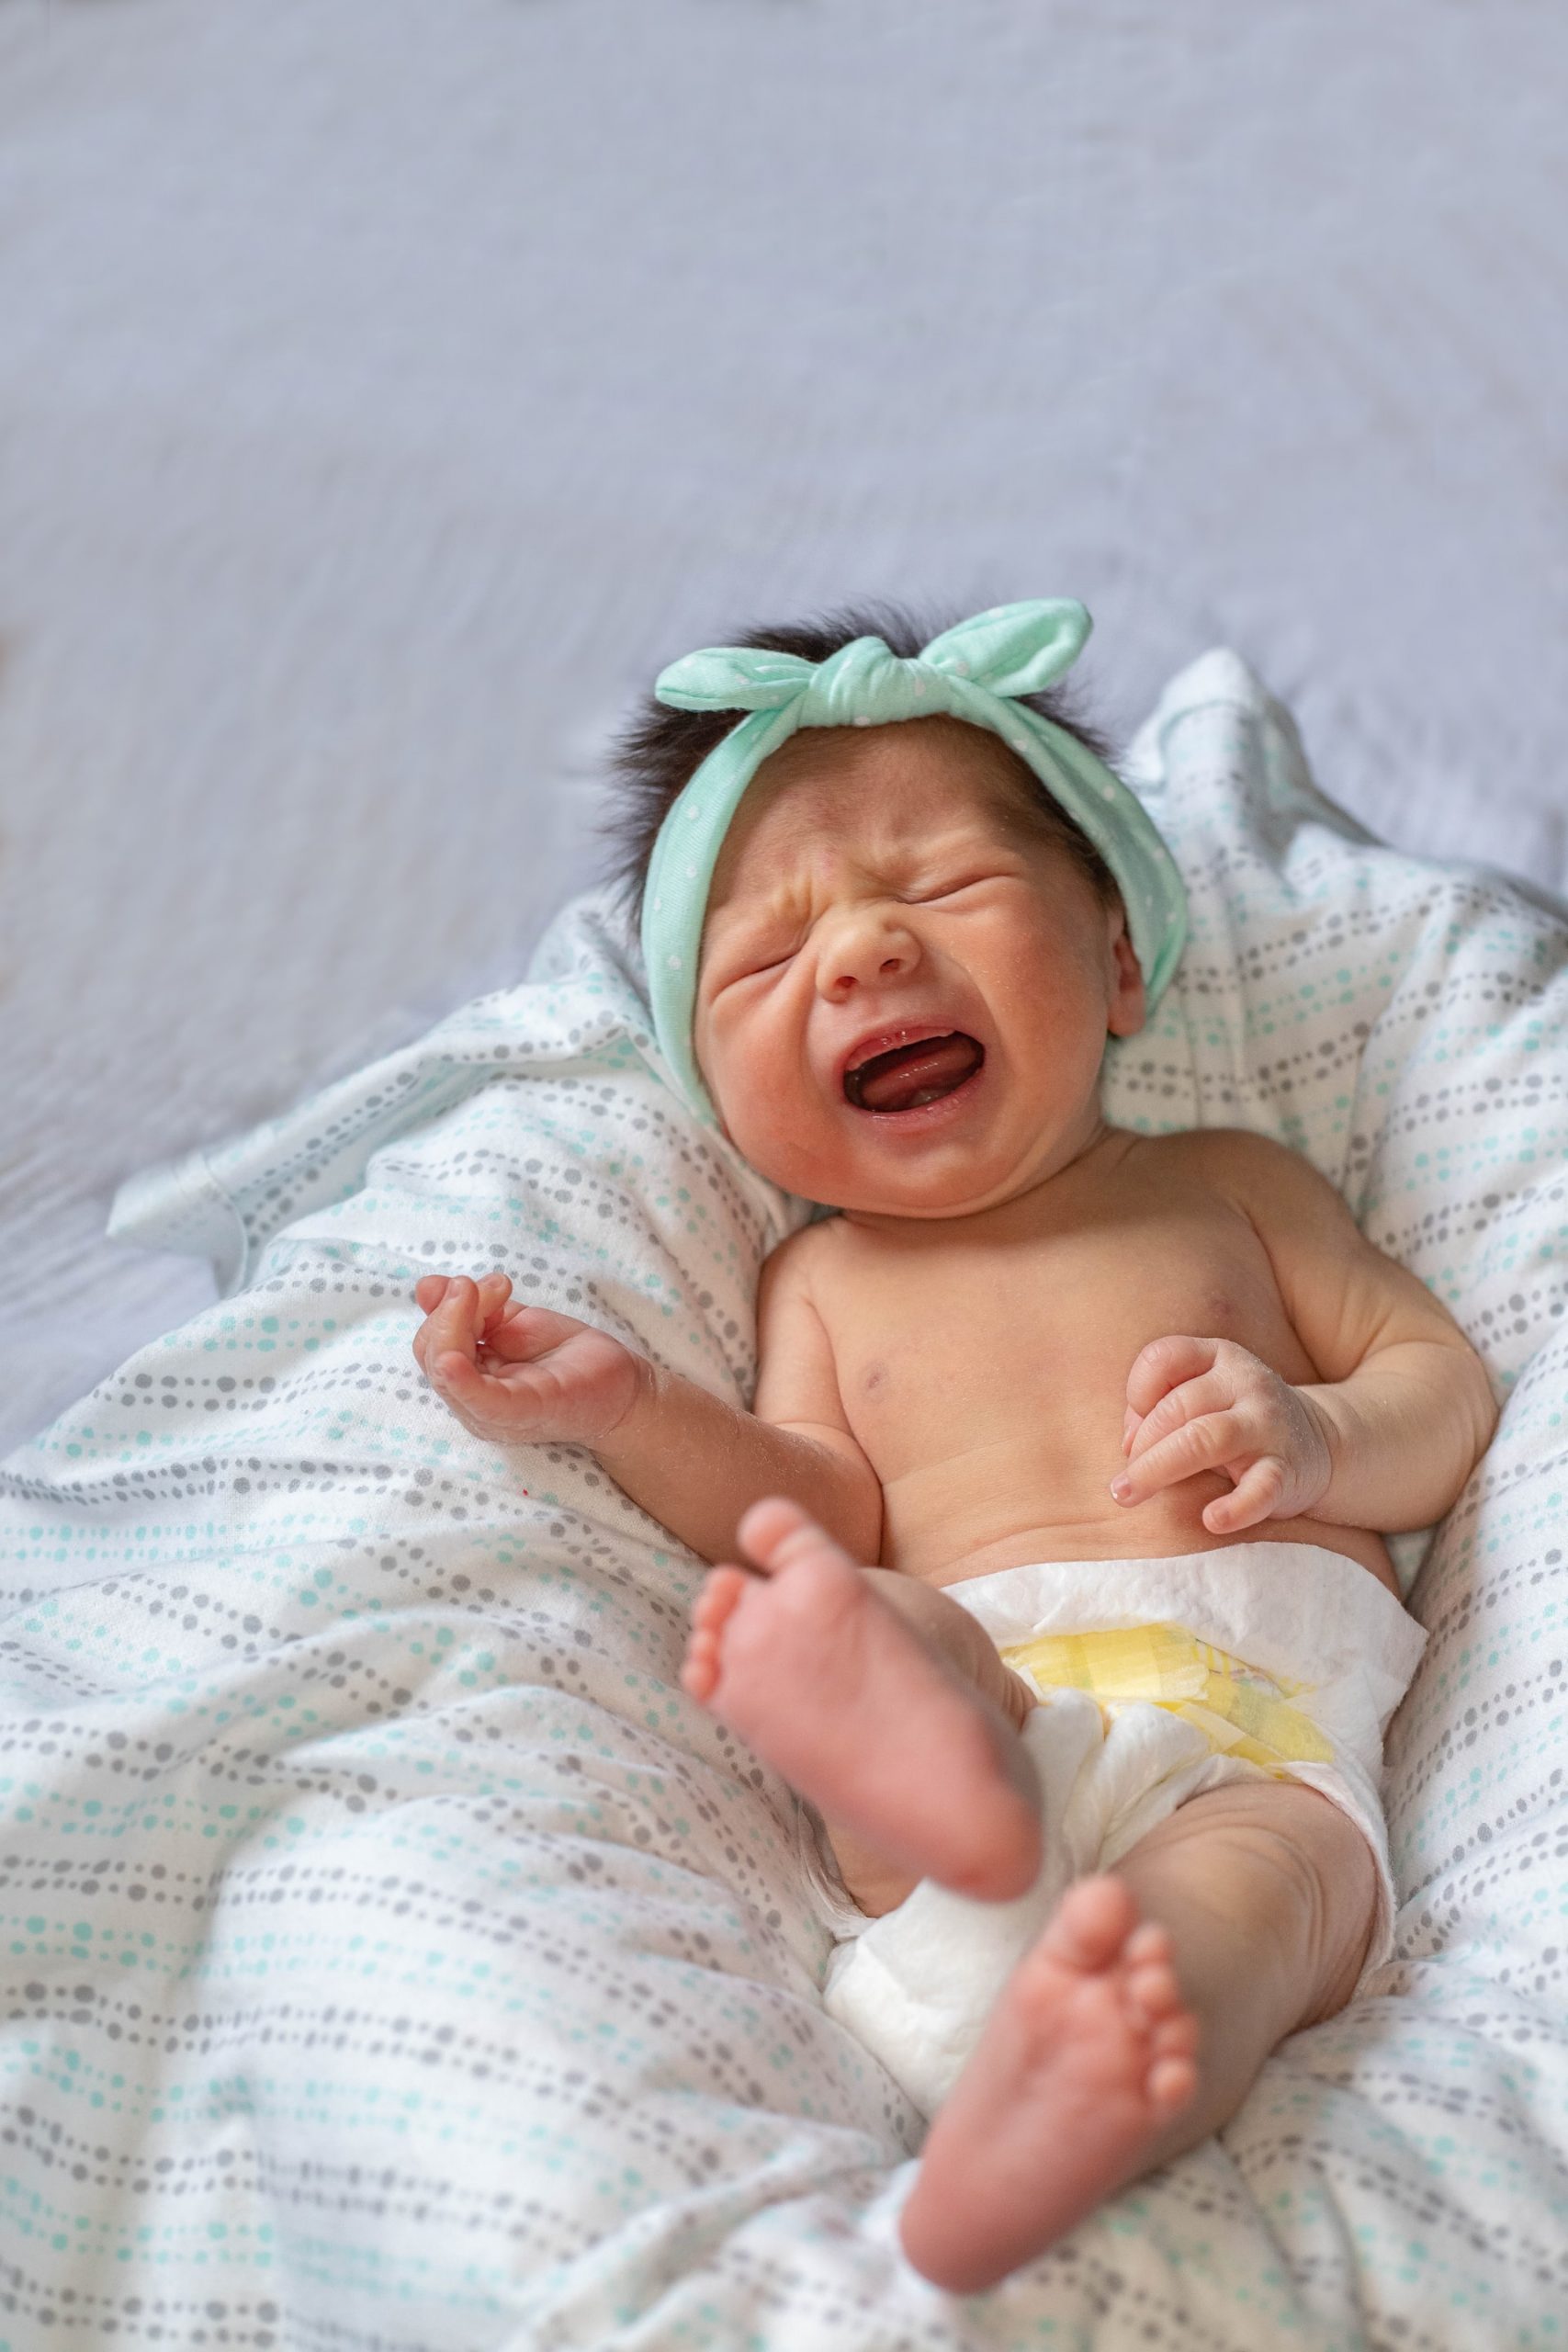 baby body language, colic in babies, colicky babies, crying babies